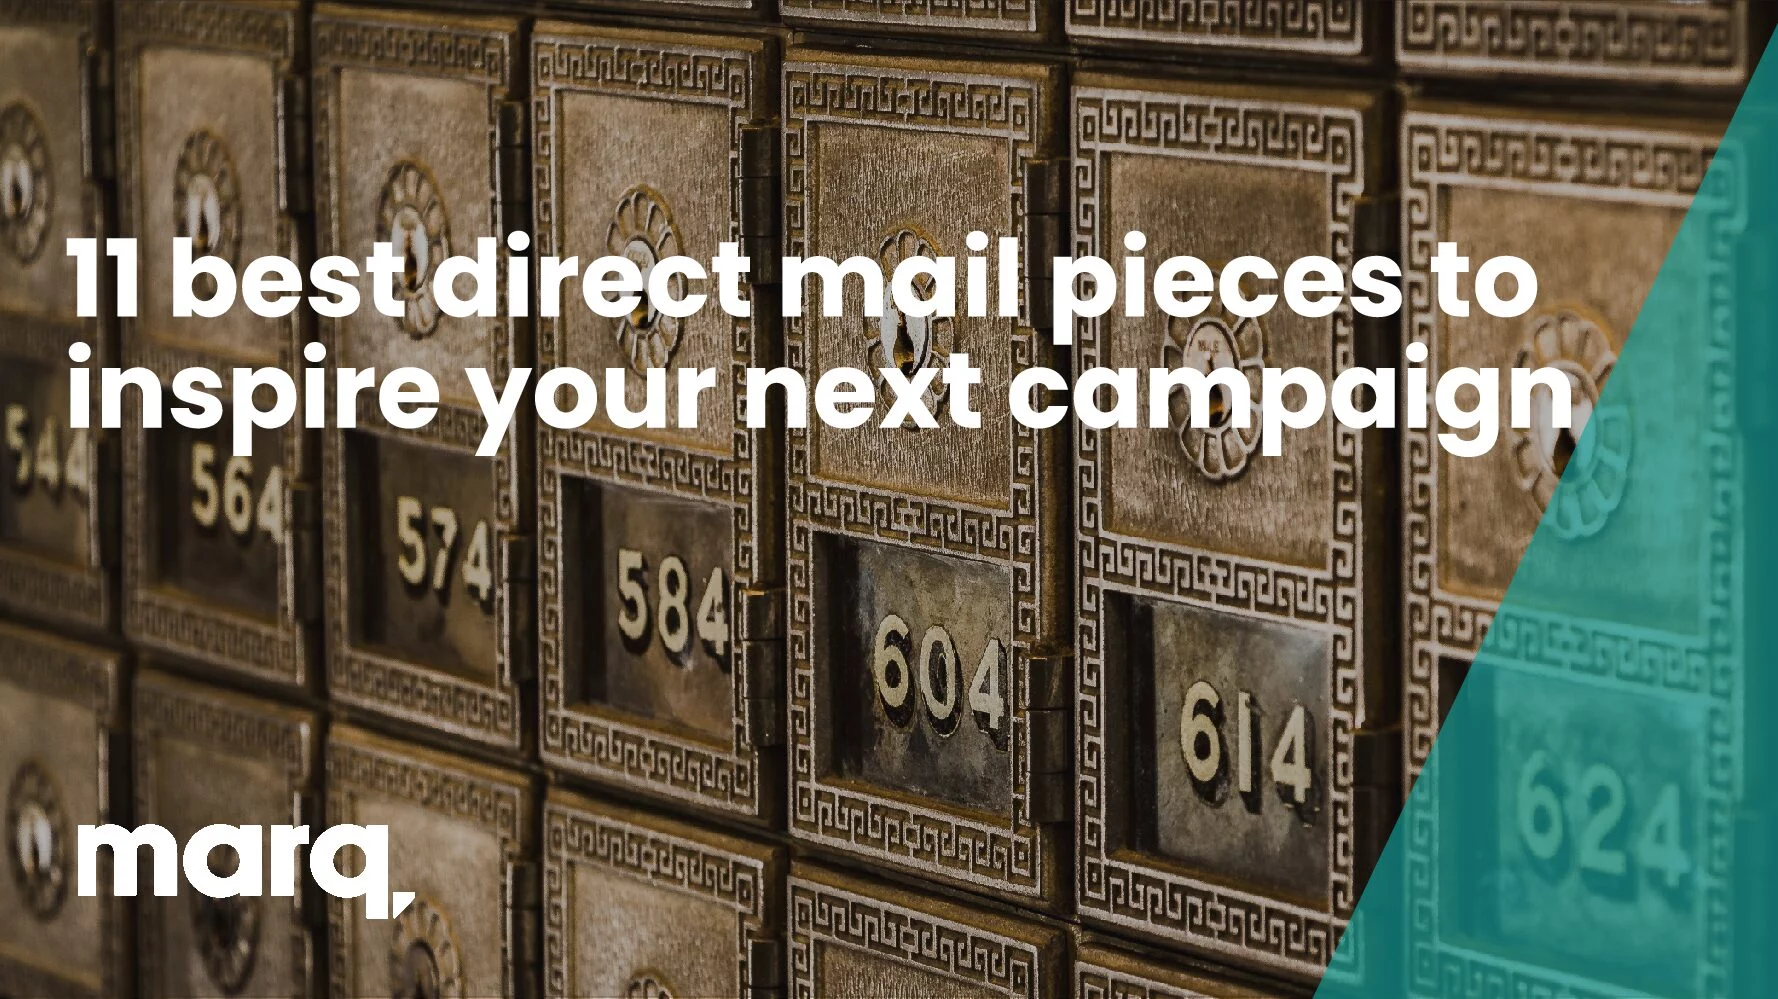 11 best direct mail pieces to inspire your next campaign